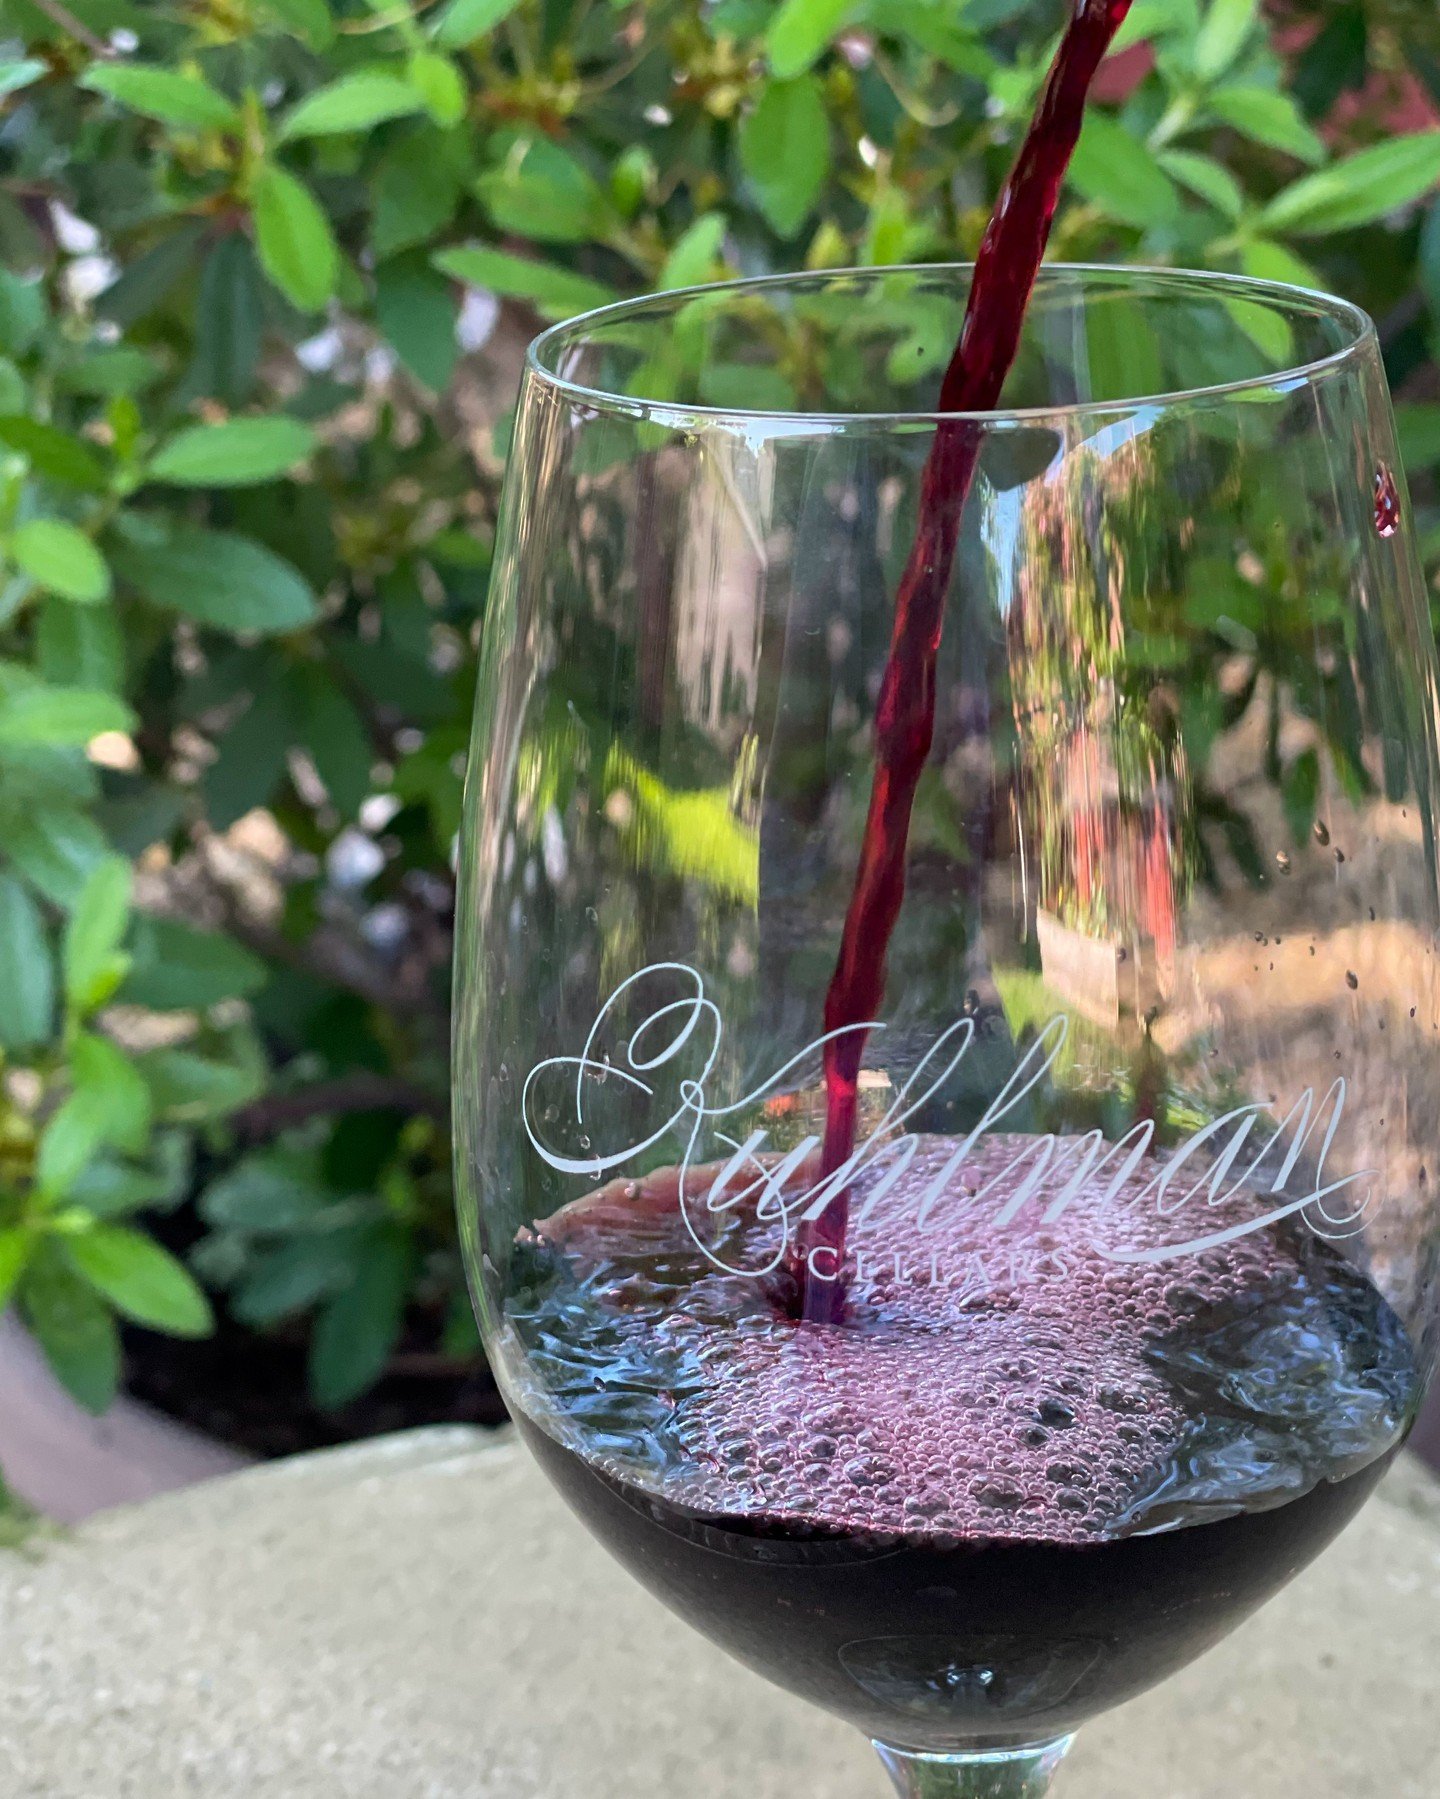 Happy #WineWednesday! Did you know? Our Vina Vita Wine Club members get all sorts of perks including 10-20% off wine,  members-only wine allocations, special events and wine pick-up parties, and more. Learn all about it: https://www.kuhlmancellars.co